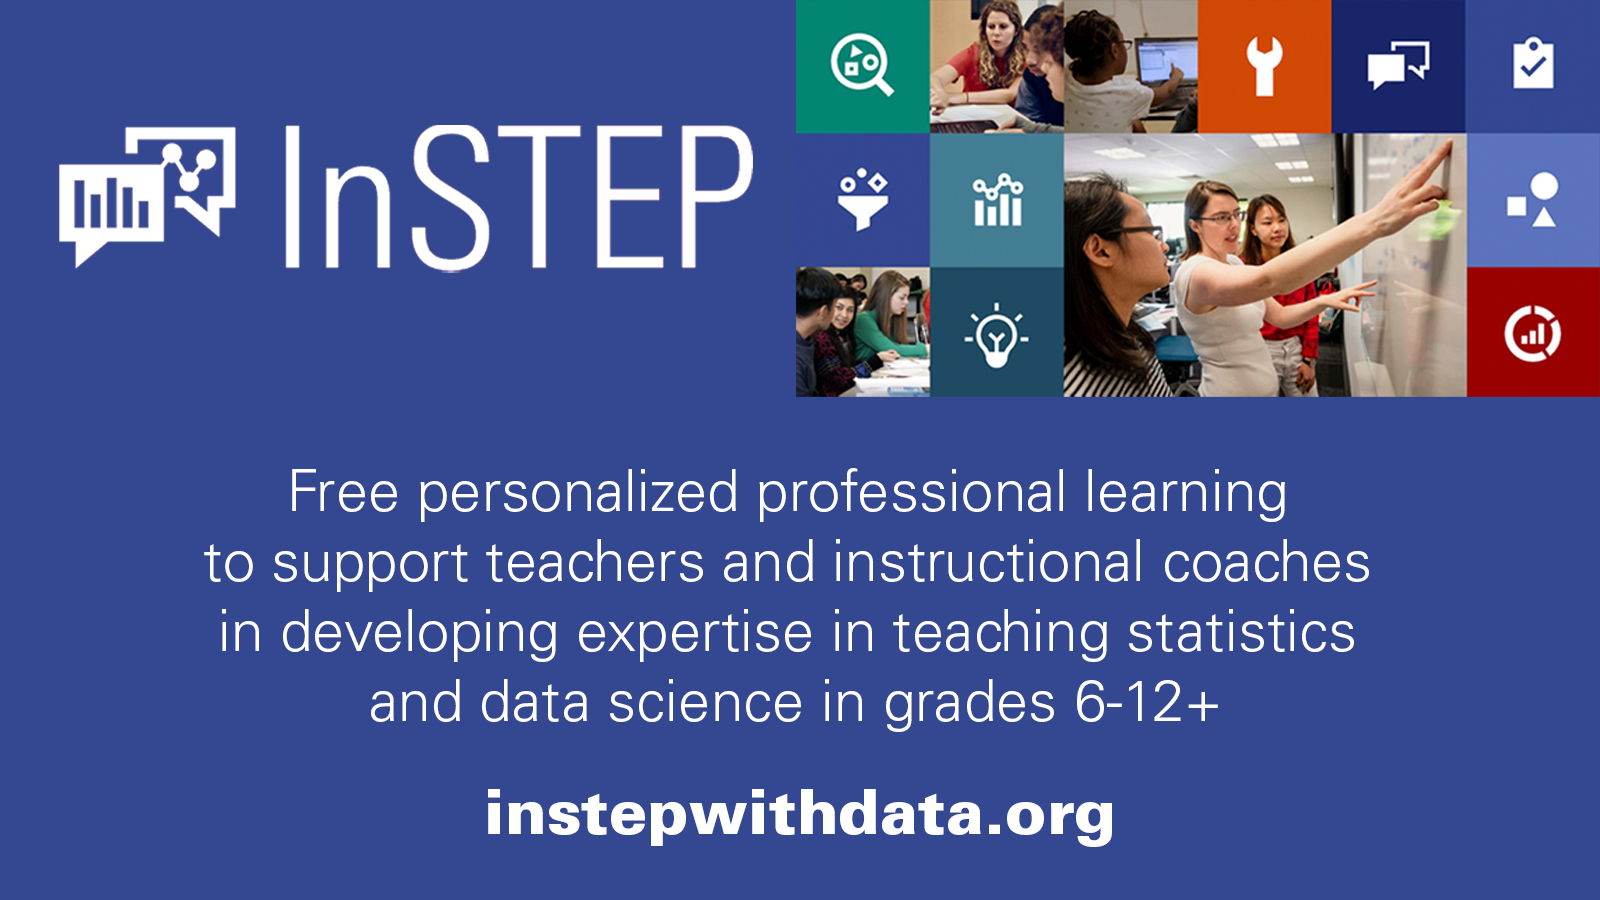 Indigo graphic with a collage of images of people working in a classroom interspersed with icons including a lightbulb, magnifying glass and a wrench. Includes the text "Free personalized professional learning to support teachers and instructional coaches in developing expertise in teaching statistics and data science in grades 6-12. instepwithdata.org